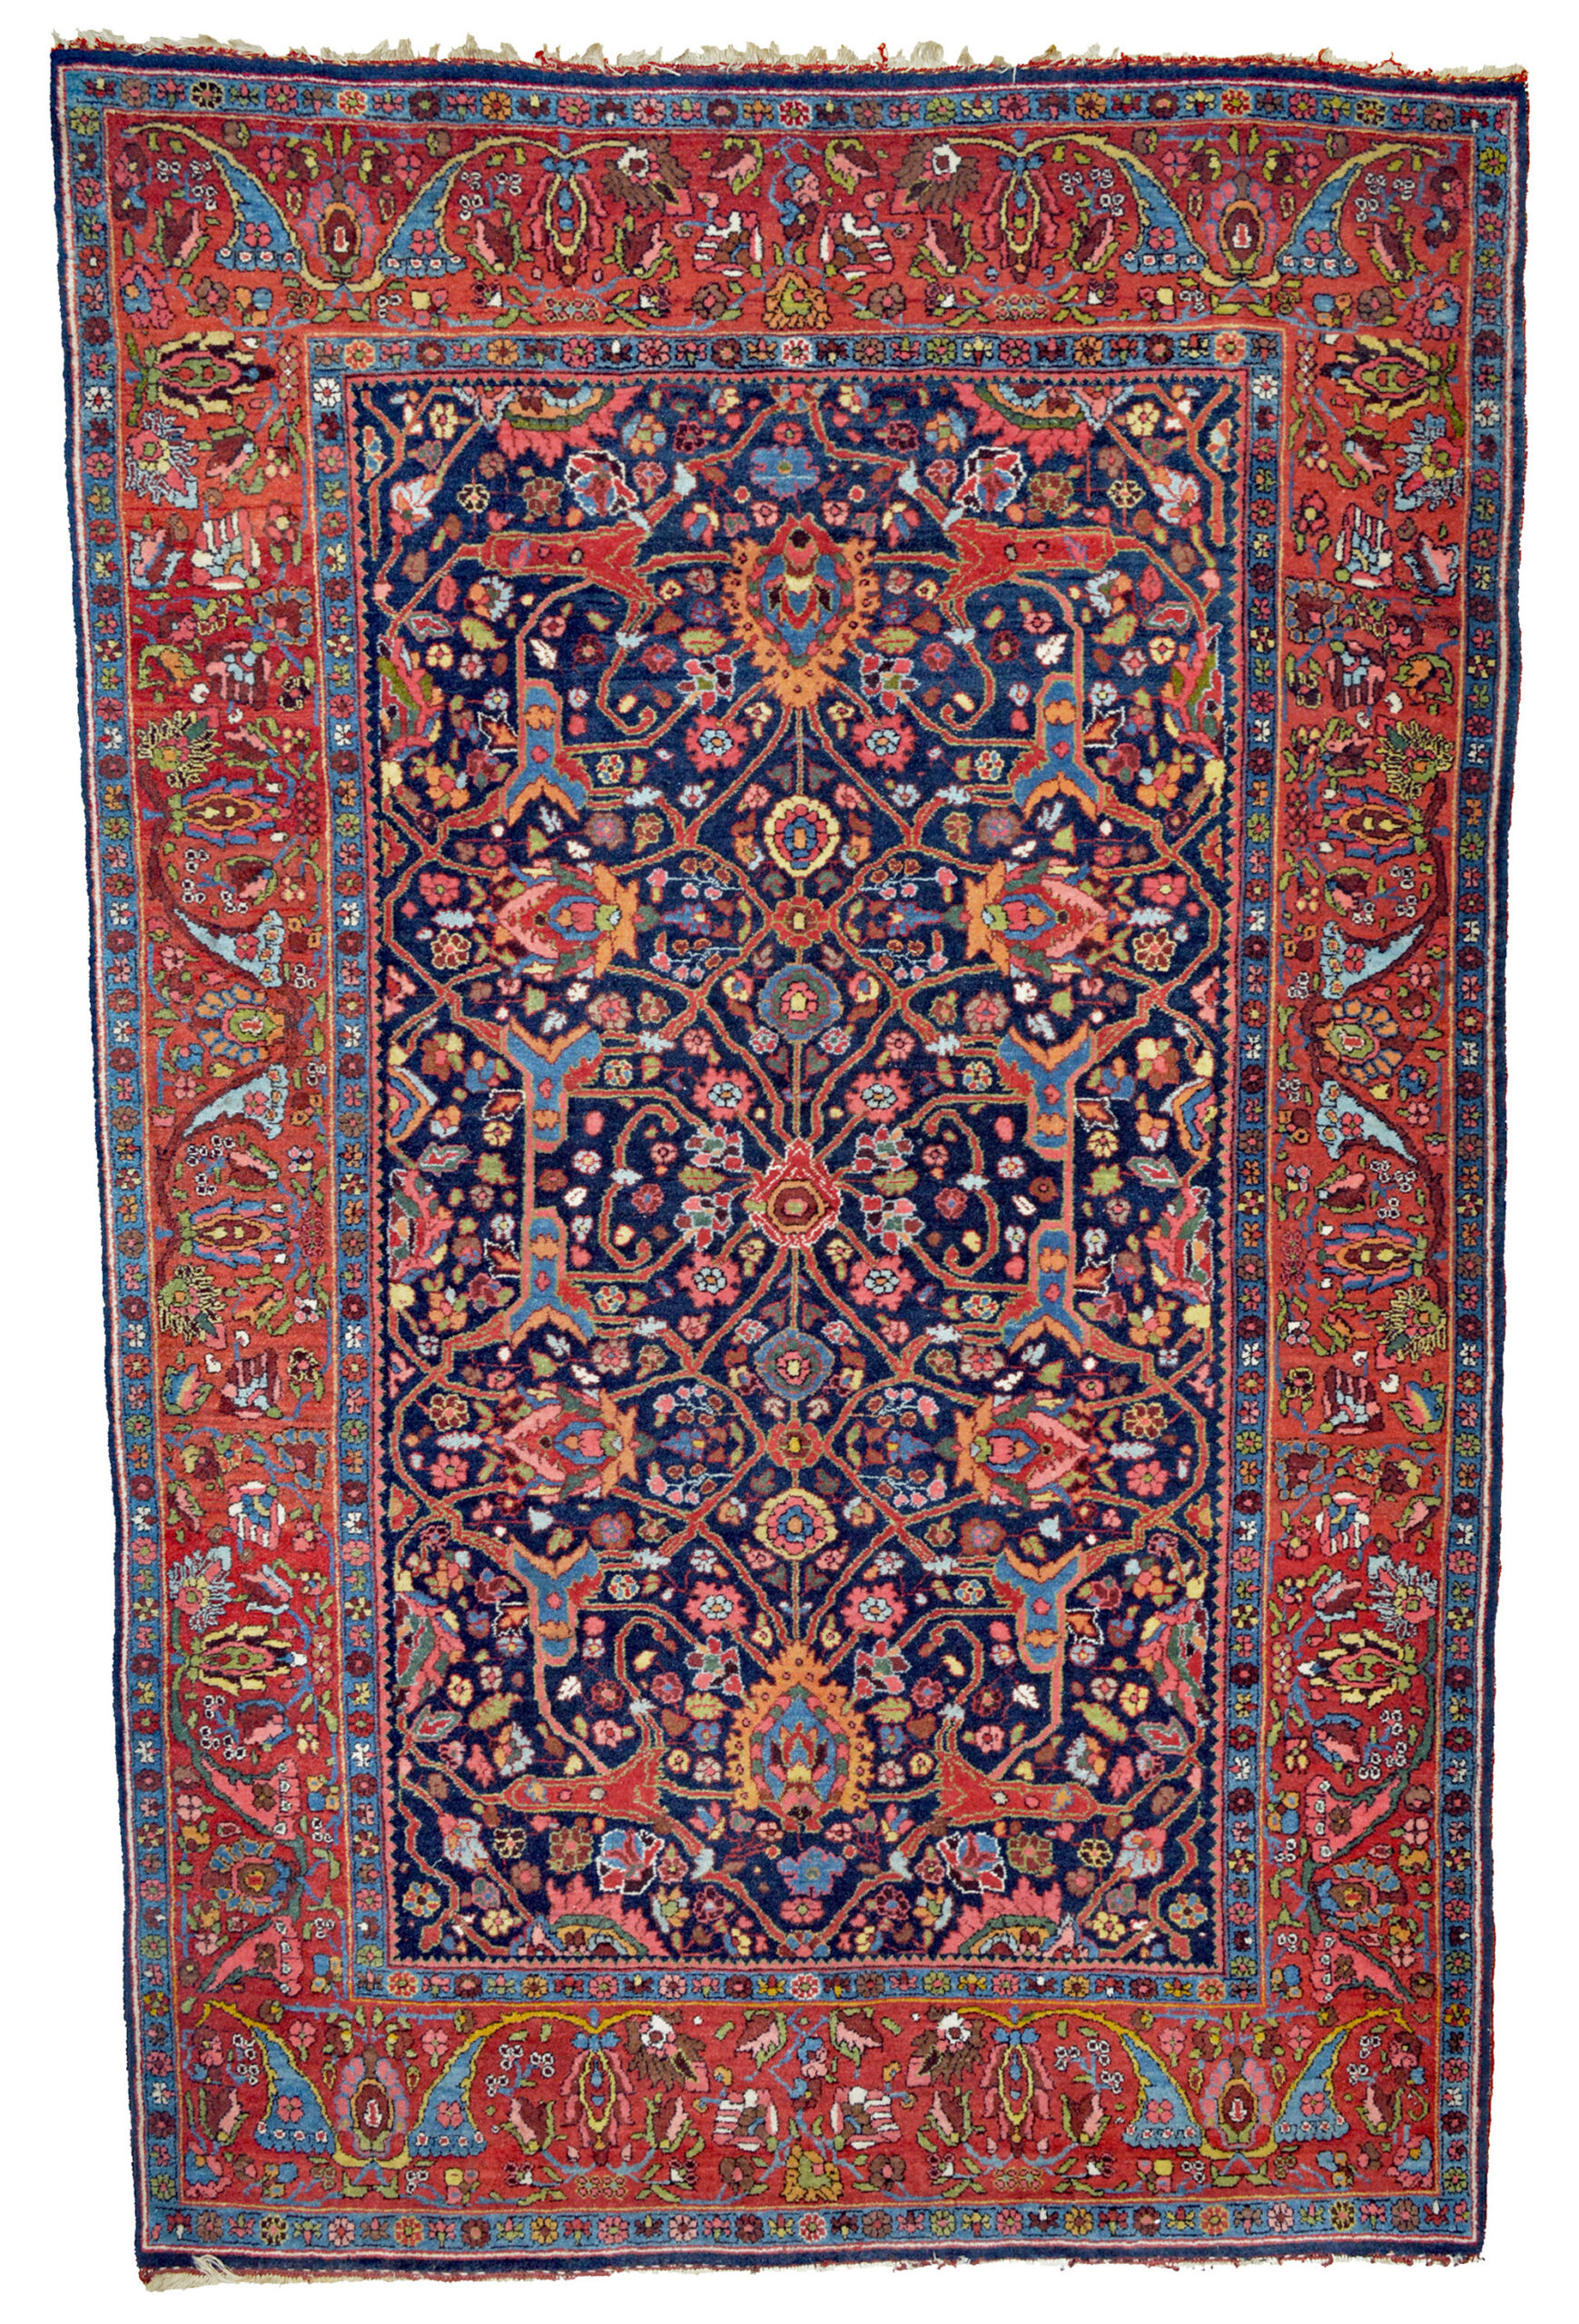 An antique Persian Bidjar measuring approximately 4'7" x 7'2" and featuring a version of the Split Arabesque design on a navy blue field that is framed by a brick red border. A remarkable range of colors is featured including mid blue, apricot, sky blue, brick red, navy blue, green, coral and ivory. Douglas Stock Gallery, antique Persian rugs Boston,MA area, Wellesley, Weston, Newton, Brookline, Needham, Dover, Lexington, Sherborn, Marblehead, Natick,MA area.